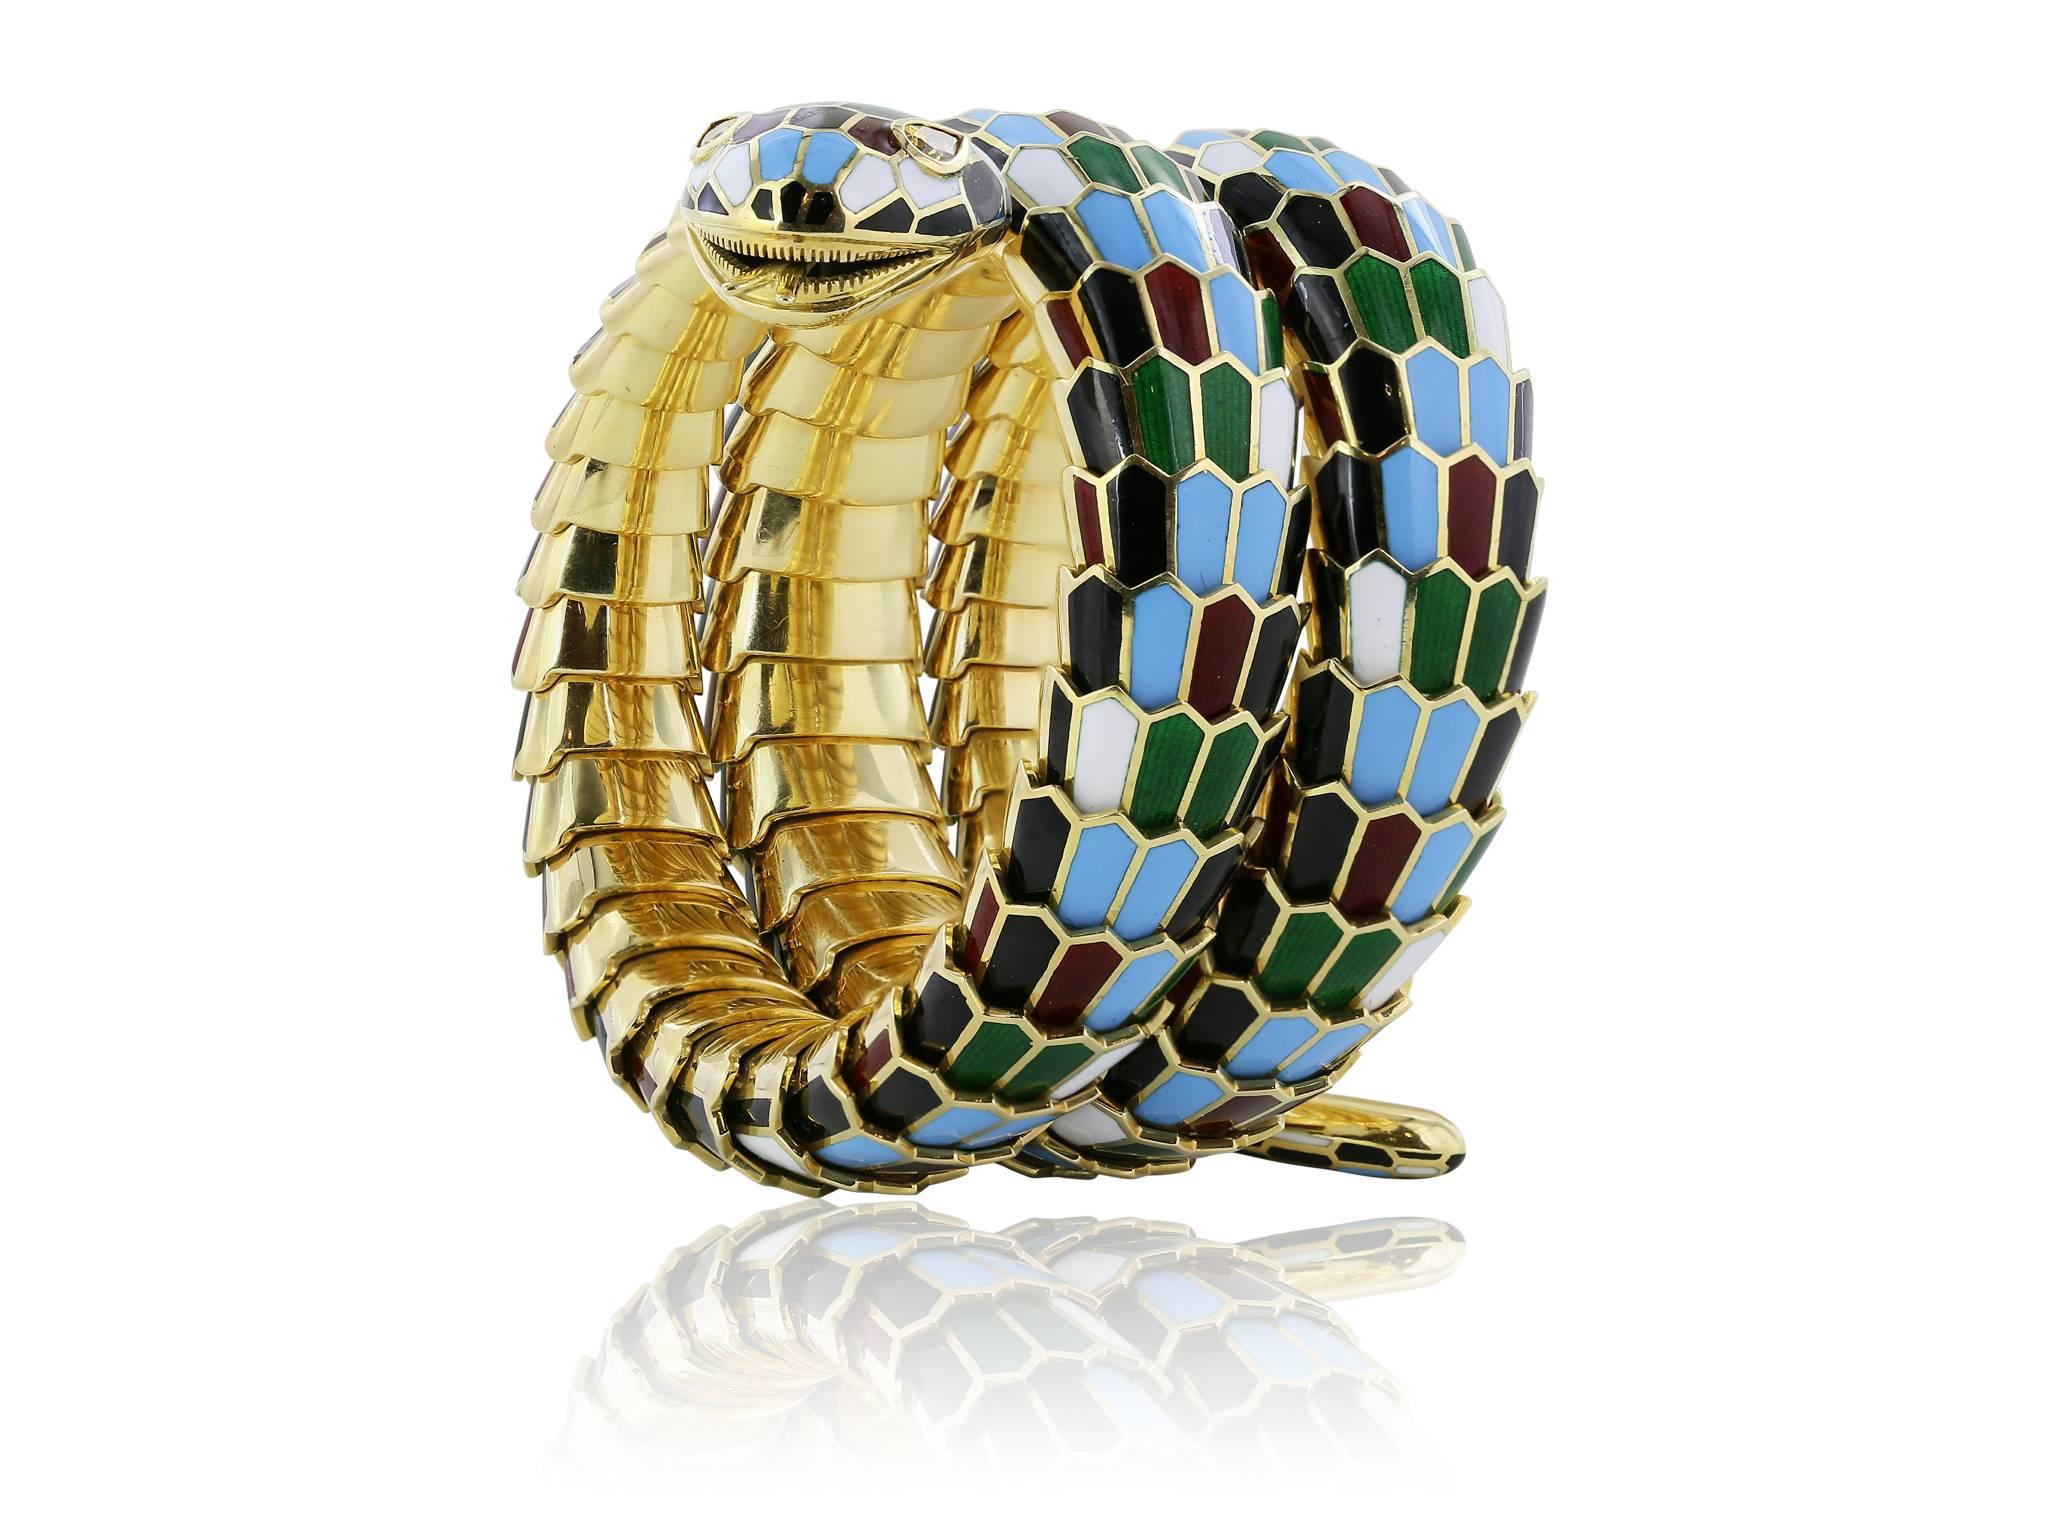 18 karat yellow gold flexible coil , harlequin enamel snake bracelet, featuring green, red, white, black and light blue enamel coiling scales, with 2 bezel set pear shape cognac diamonds for the eyes. 117.95 dwt, 183.44 grams.